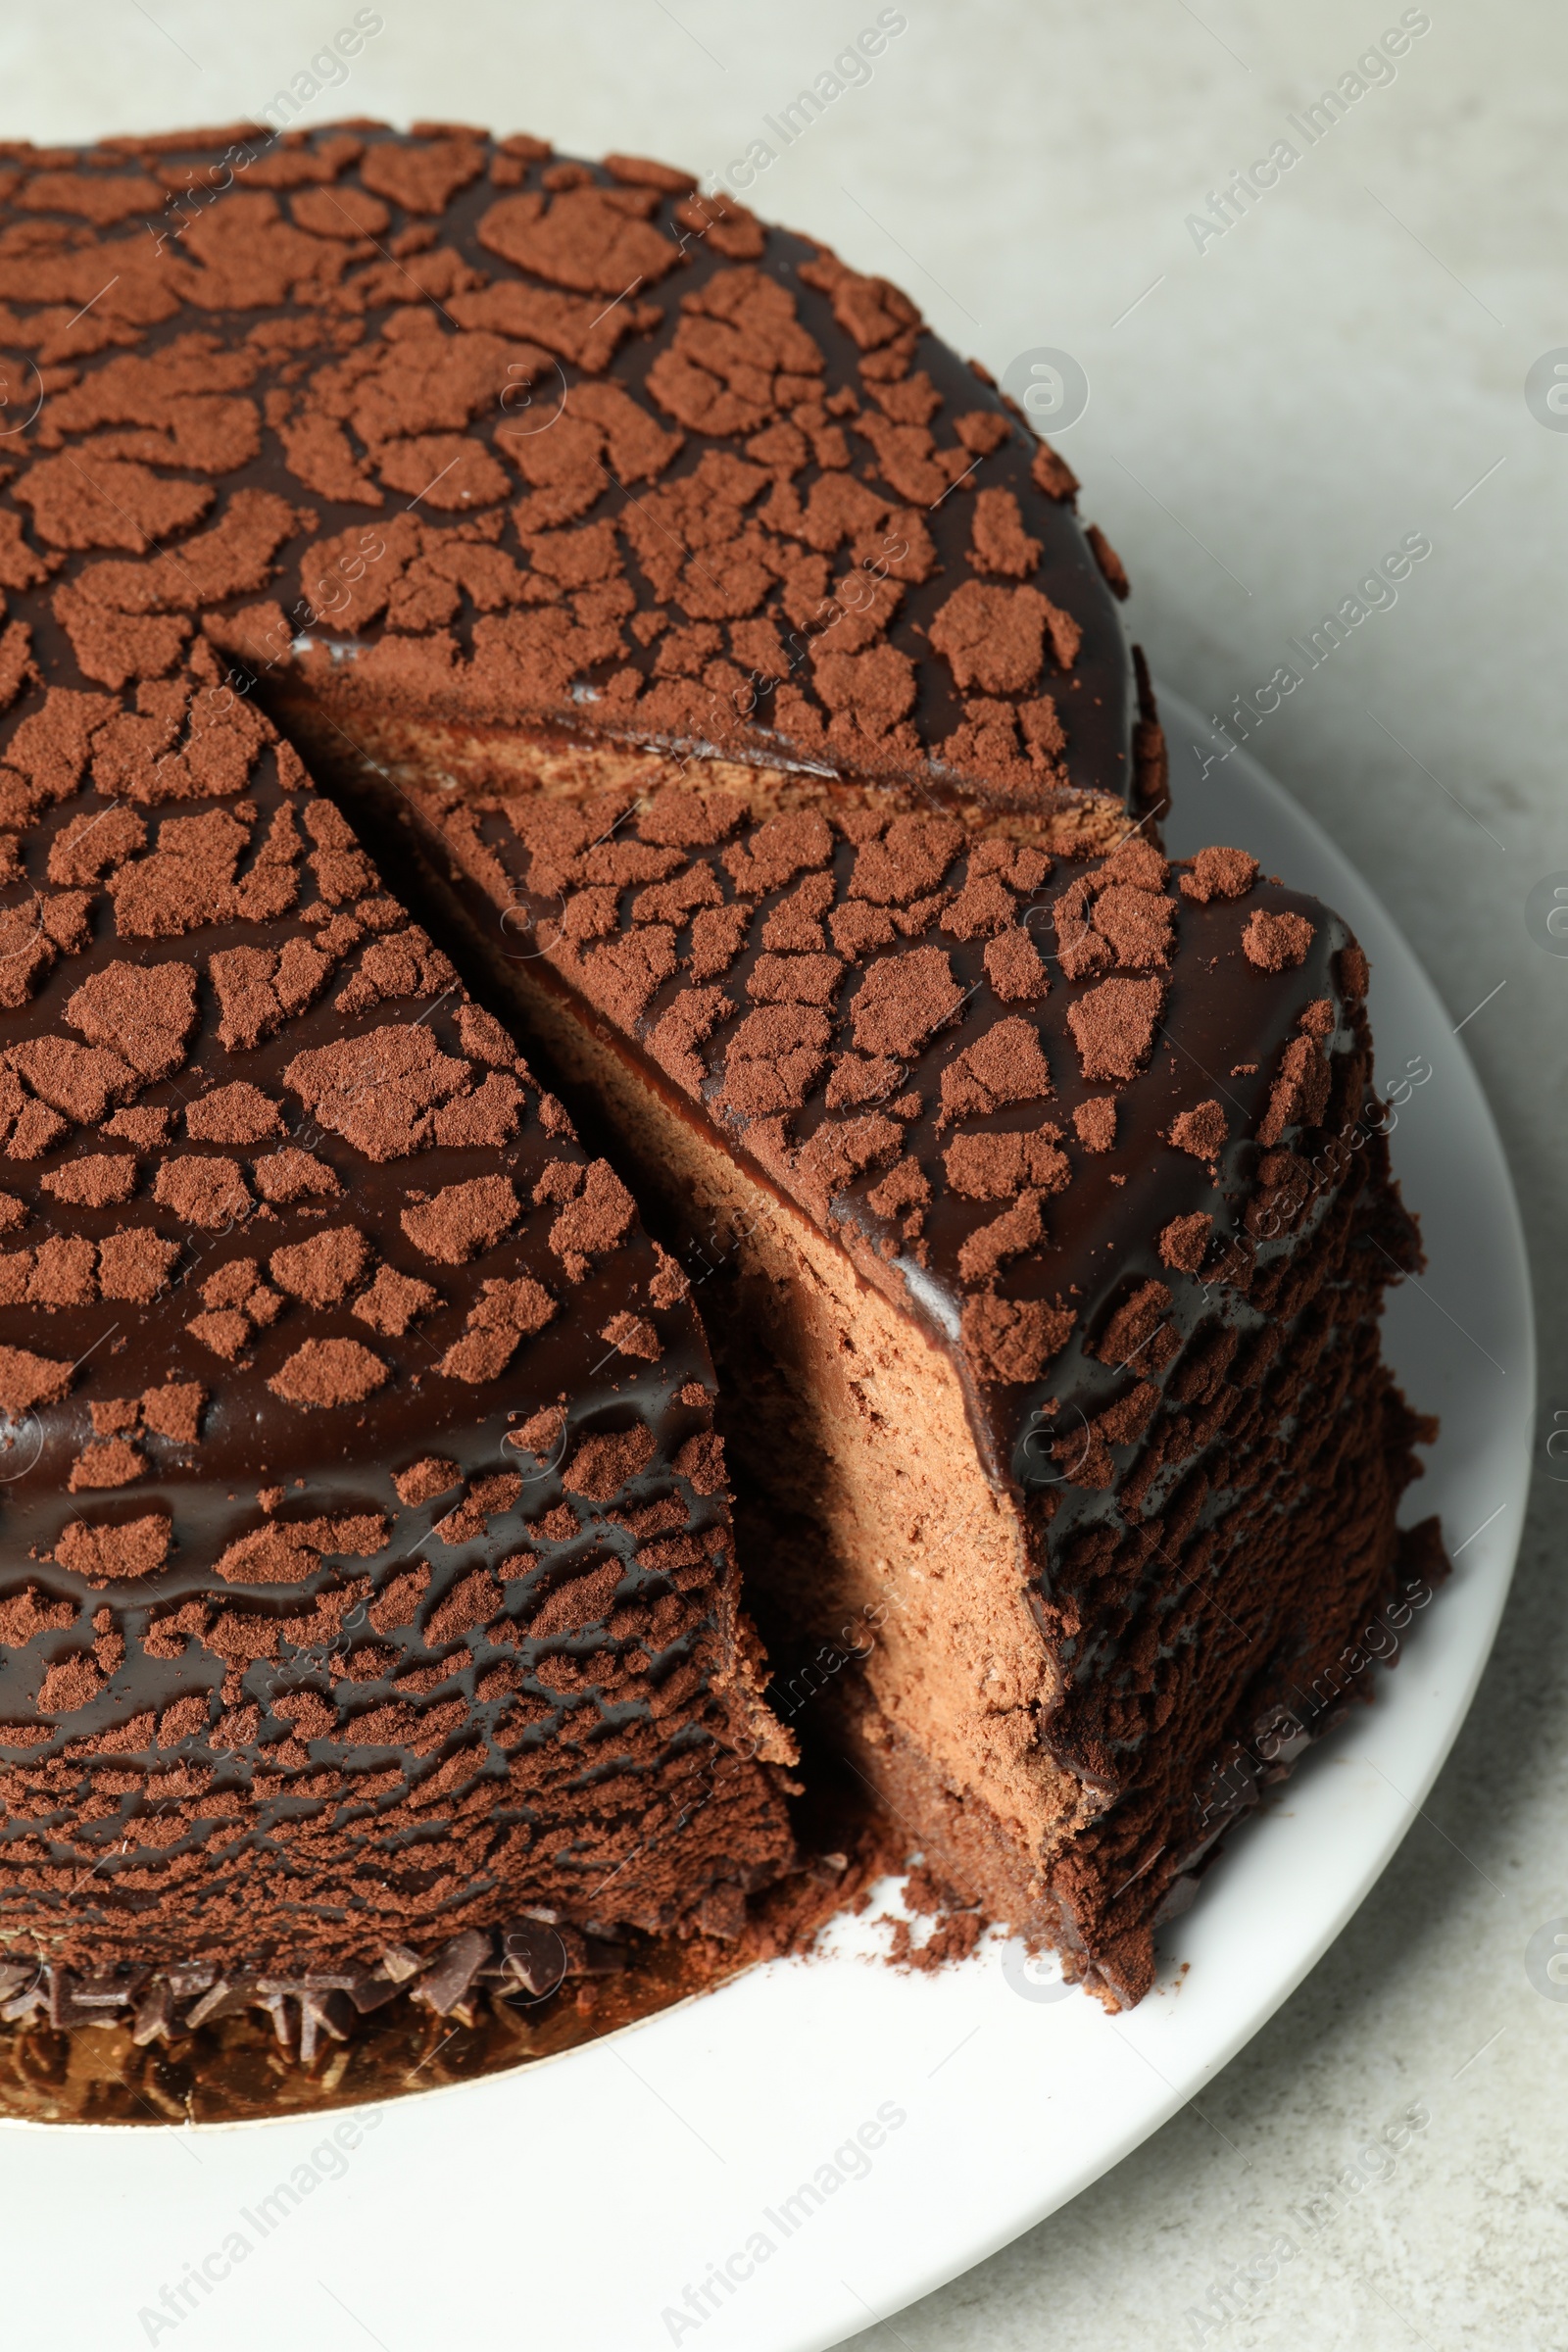 Photo of Delicious chocolate truffle cake on grey table